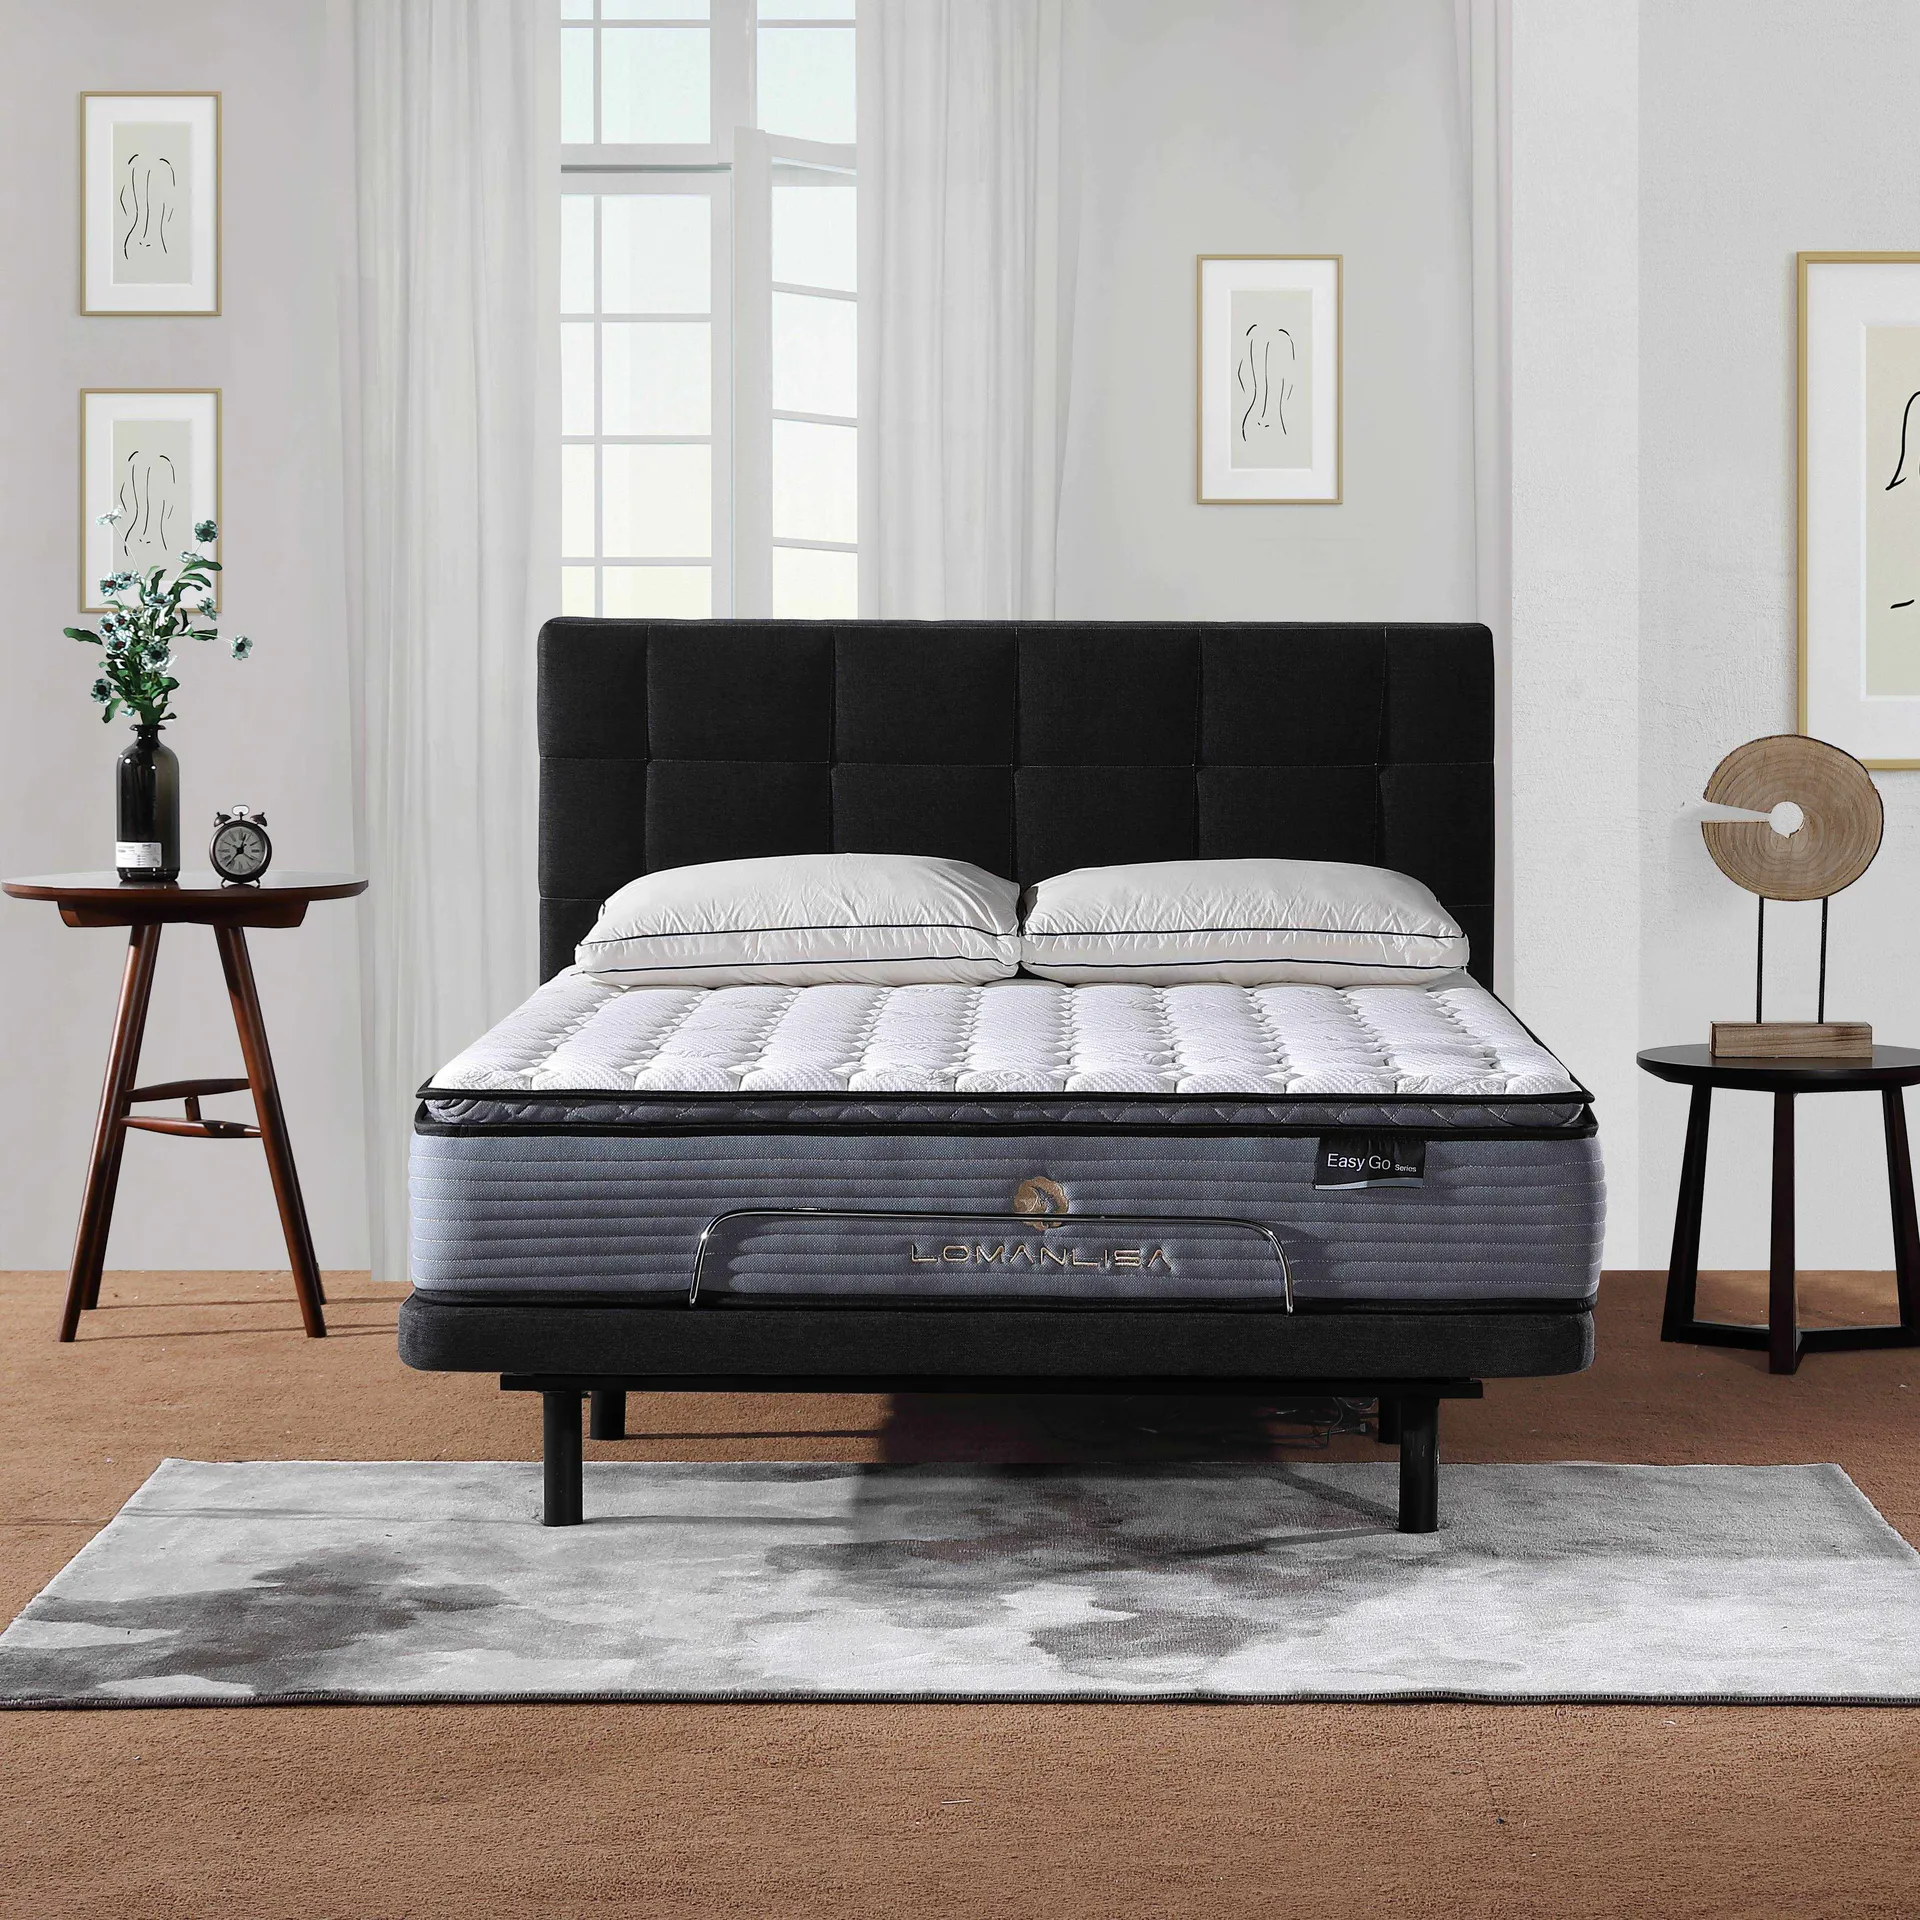 32PB-21 | Pillow Top Design Electric Adjustable Bed with Quiet and Stable Motor in King Queen Size